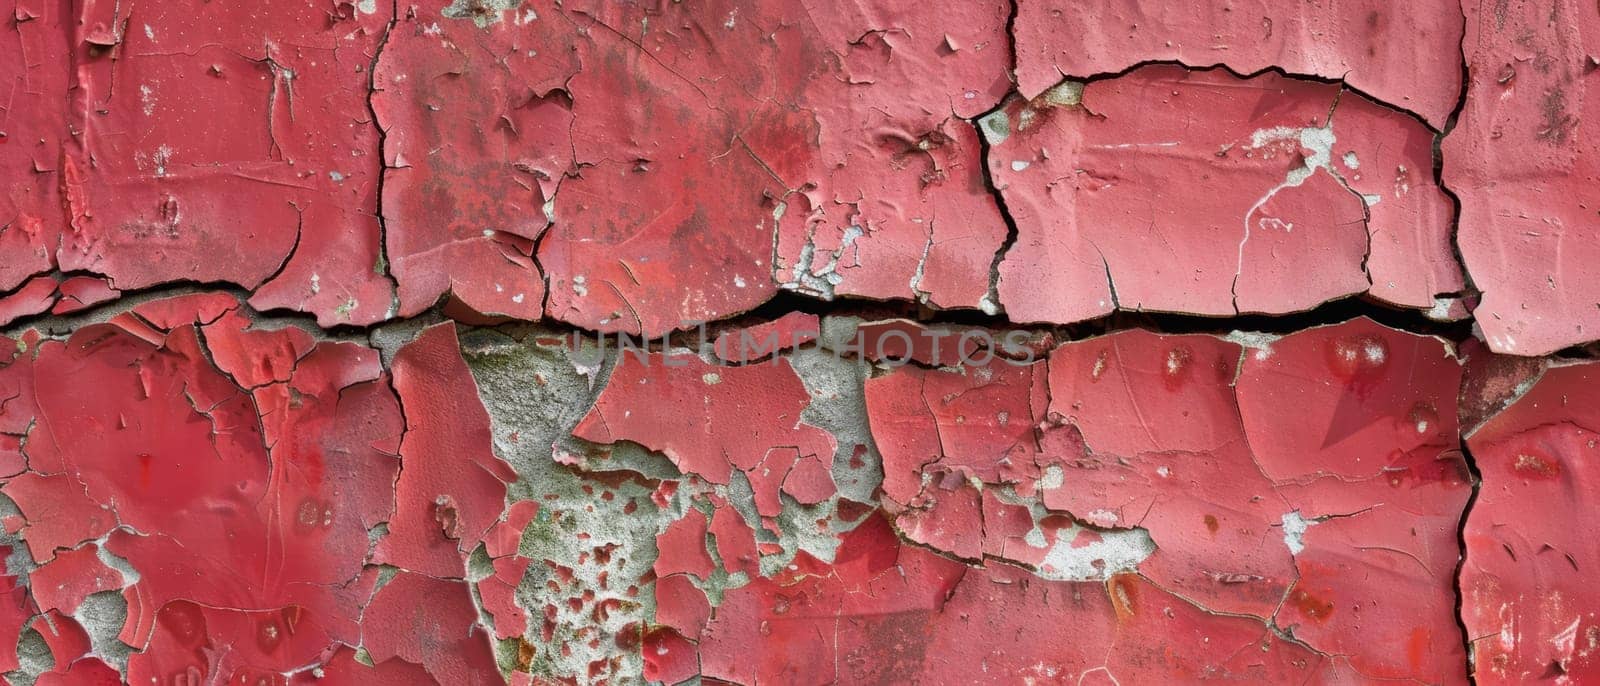 The concrete wall's peeling red paint creates an intriguing texture, a reflection of the urban landscape's ever-changing face. The red tones vary in intensity. by sfinks